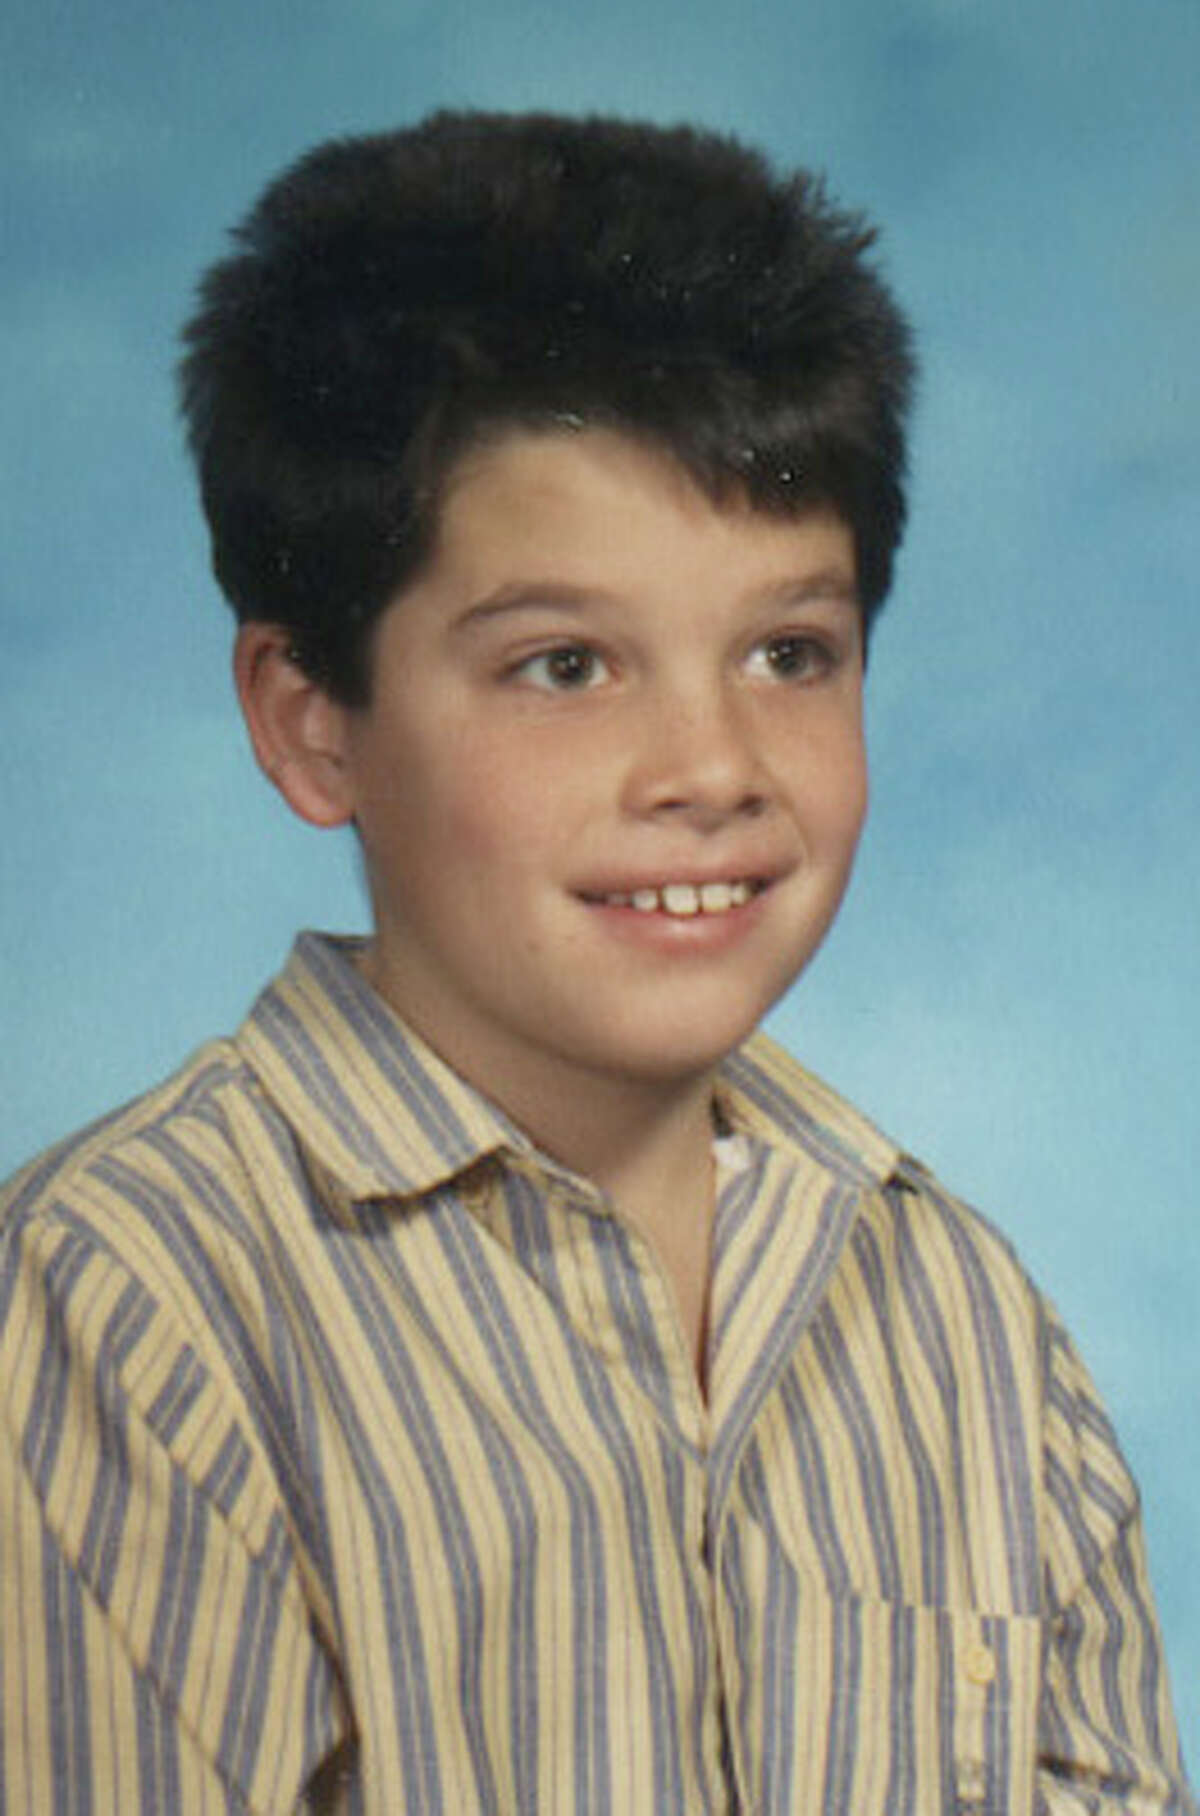 Childhood photo of Michael DeSantis 1987-1988 during 5th grade. DeSantis said several priests used him for sex at a Colonie apartment rented by one of the priests.